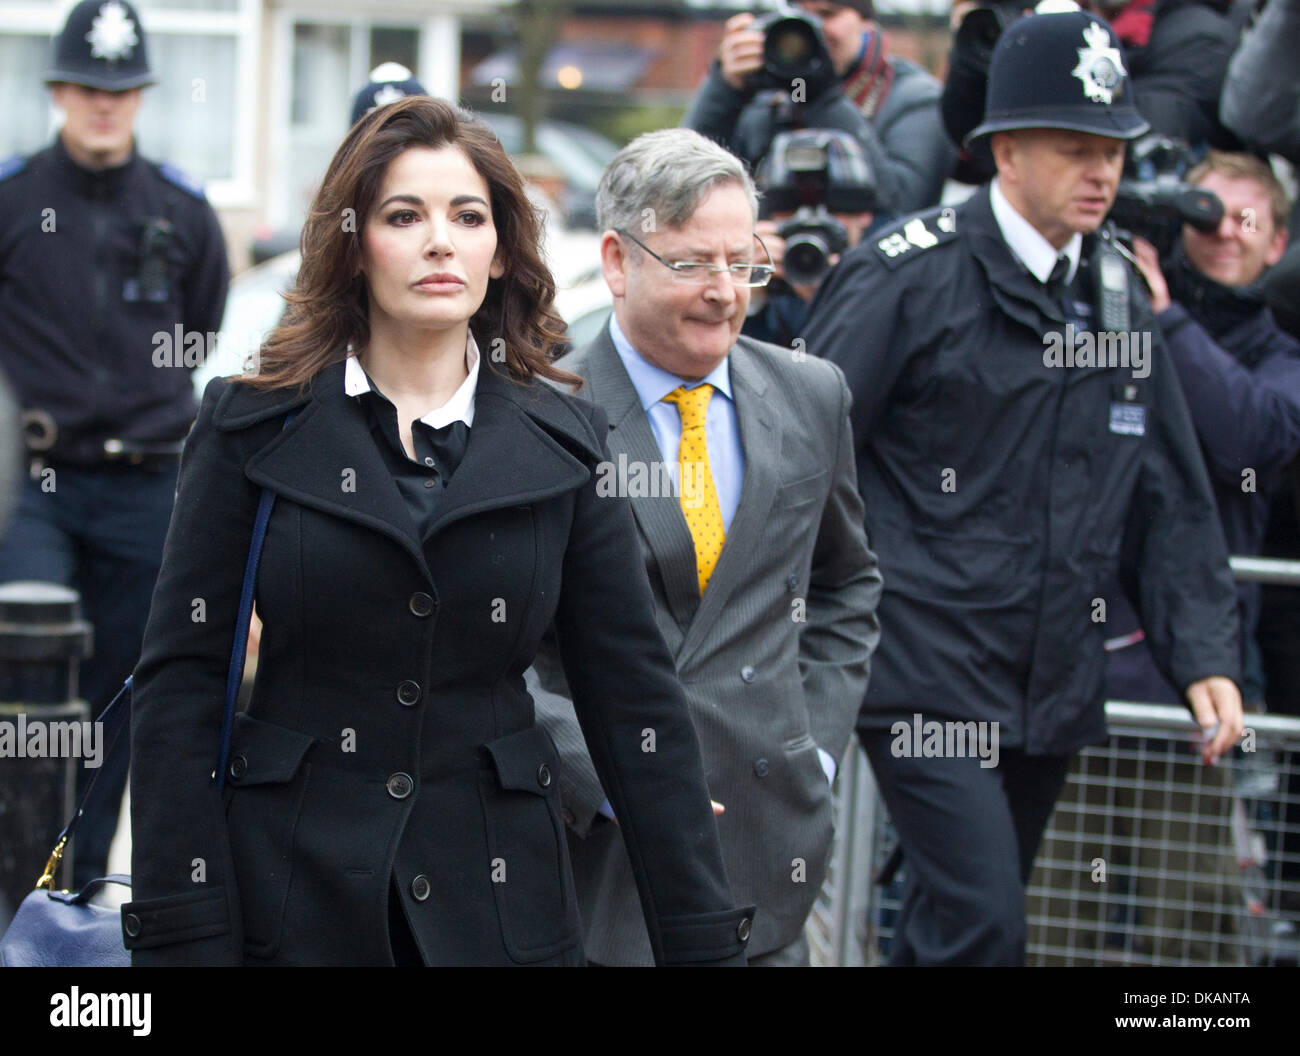 London, UK. 4th December 2013. TV chef Nigella Lawson arrives at Isleworth Crown Court in west London to give evidence in the trial of Elisabetta, 41, and co-defendant Francesca, 35, both  former aides of Ms Lawson and accused  with committing fraud against Charles Saatchi, which is said to have taken place between January 2008 and last December .Ms Lawson, 53, wearing a long dark coat, was greeted by dozens of photographers and television crews waiting outside Isleworth Crown Court in west London as she arrived this morning. Credit:  Jeff Gilbert/Alamy Live News Stock Photo